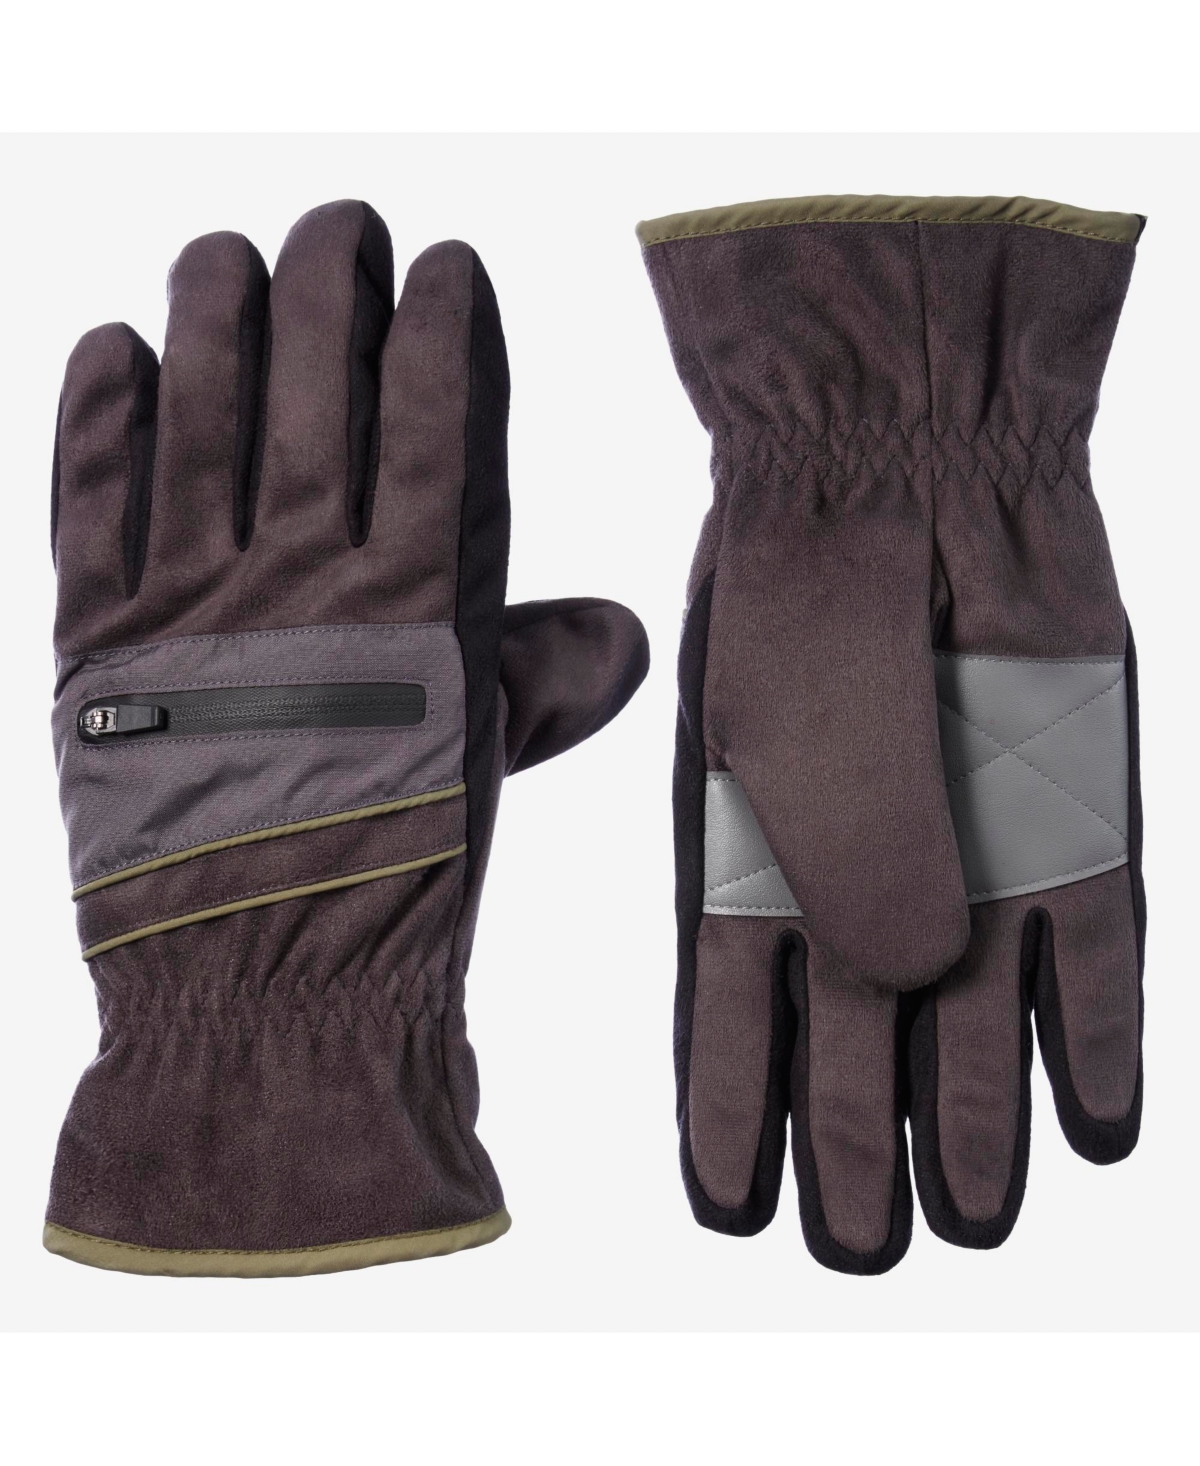 Men's Microsuede Water Repellent Gloves with Zipper Pouch - Lead